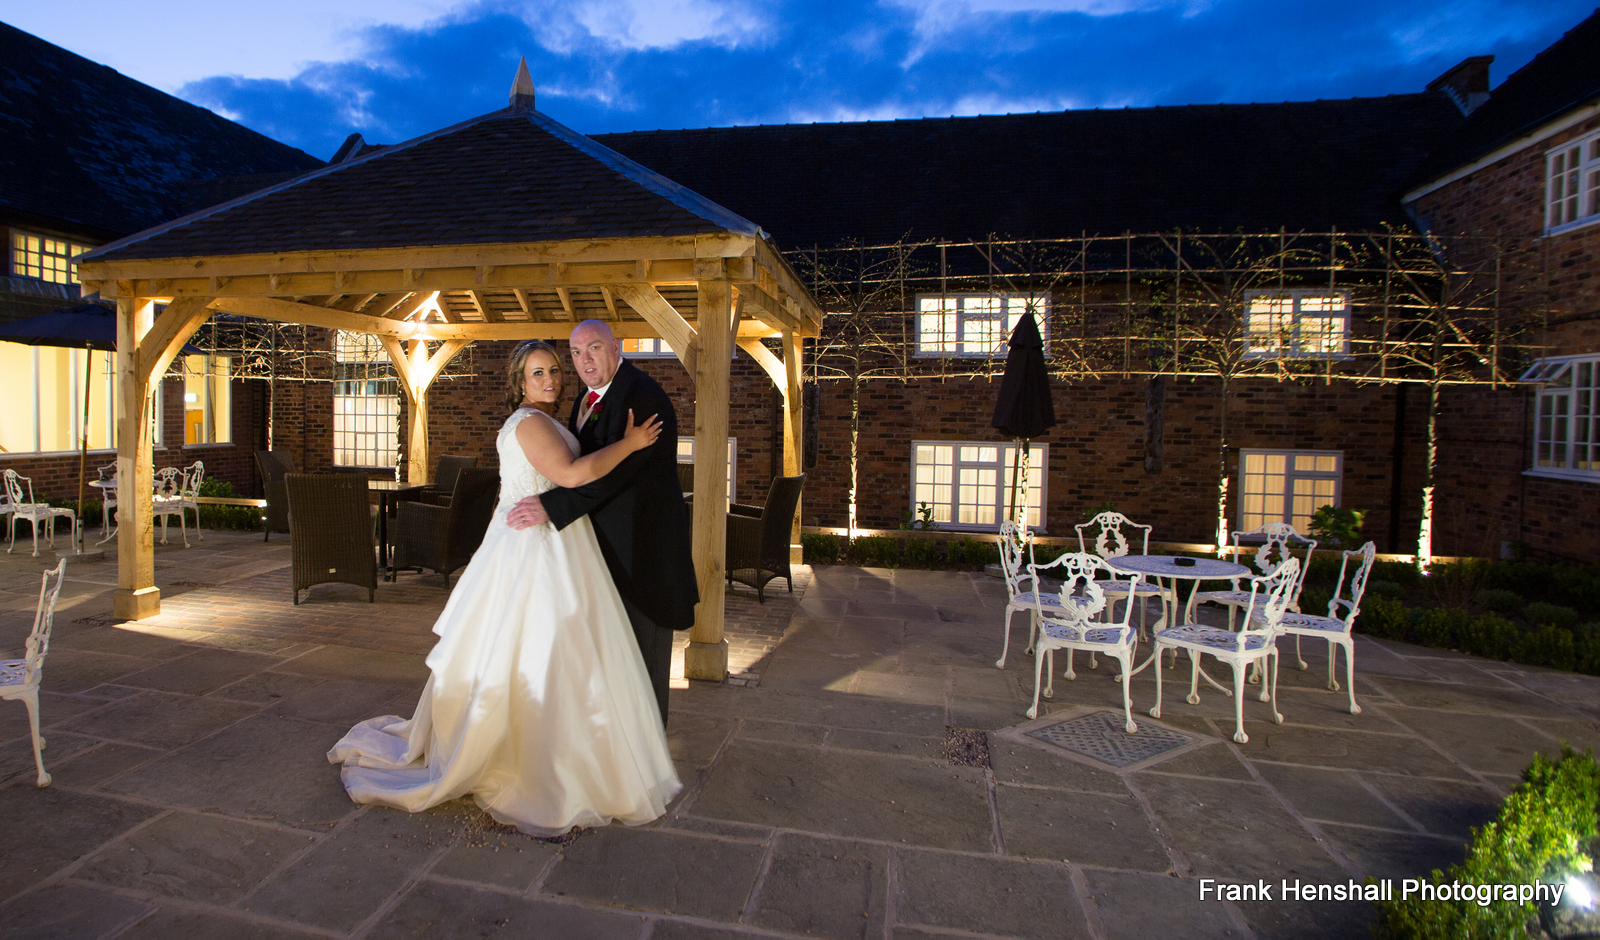 BEST WESTERN Manor House Hotel, Staffordshire Wedding Venue - Competition